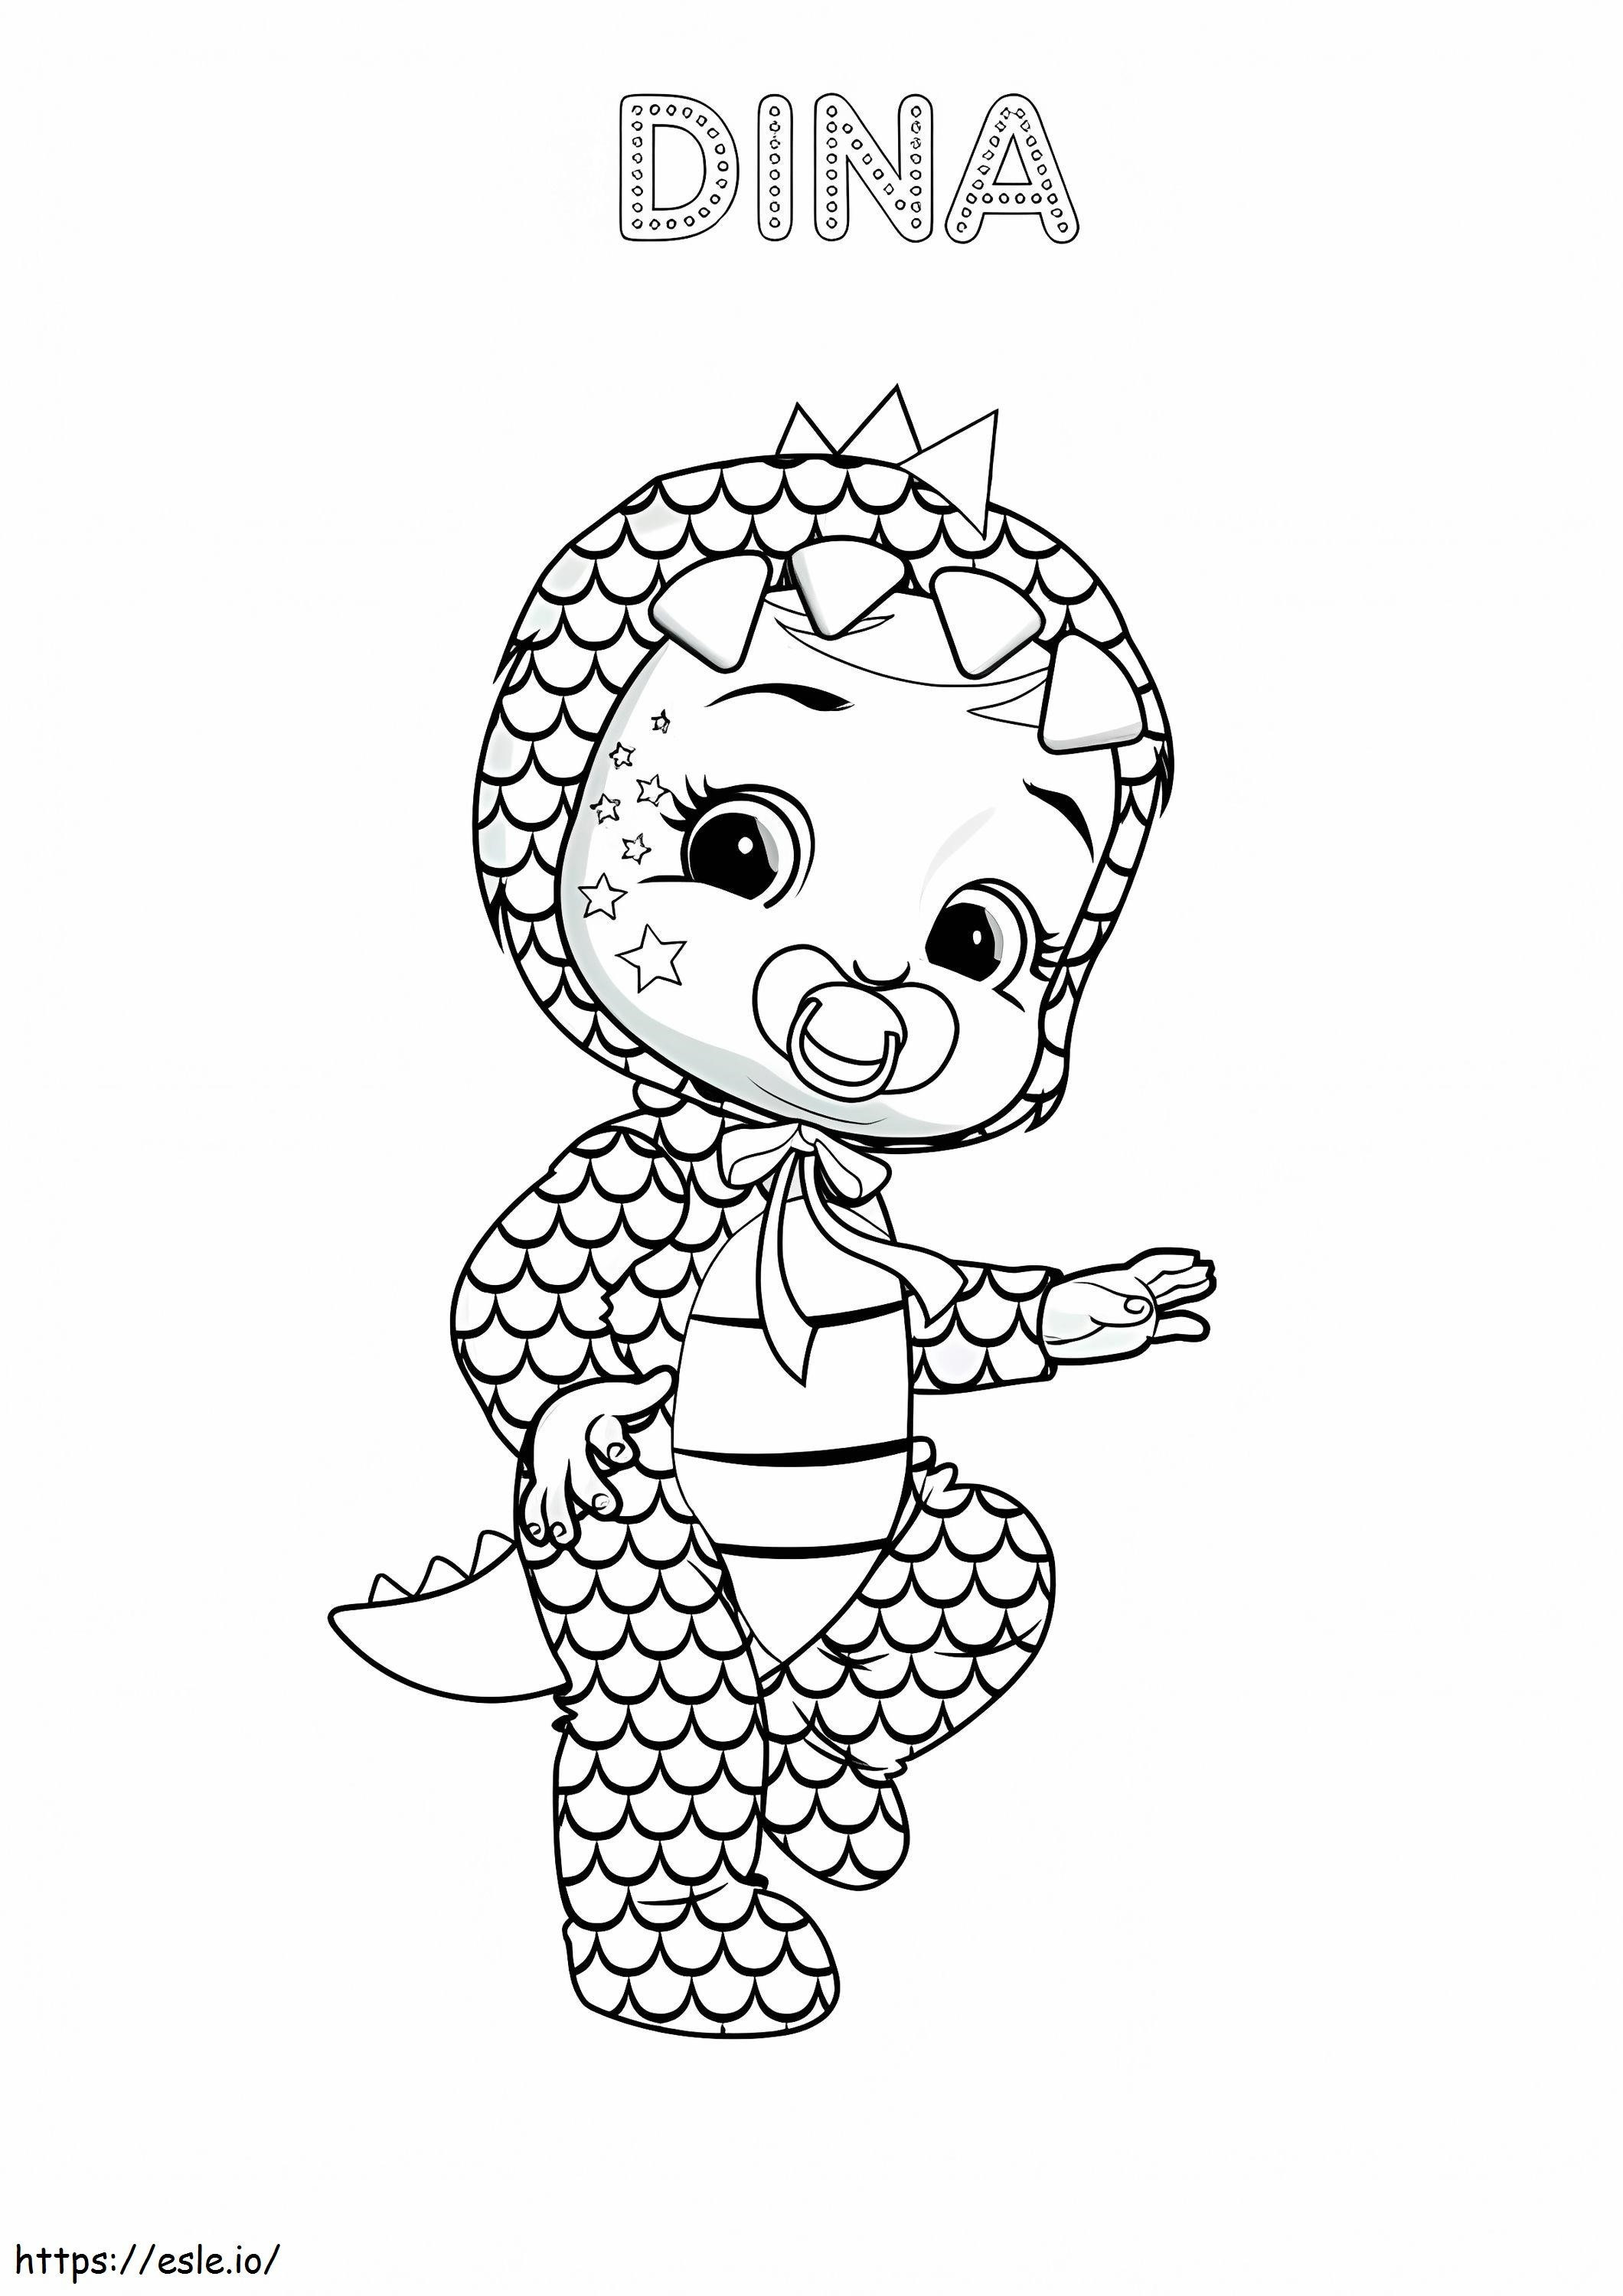 cry babies coloring pages